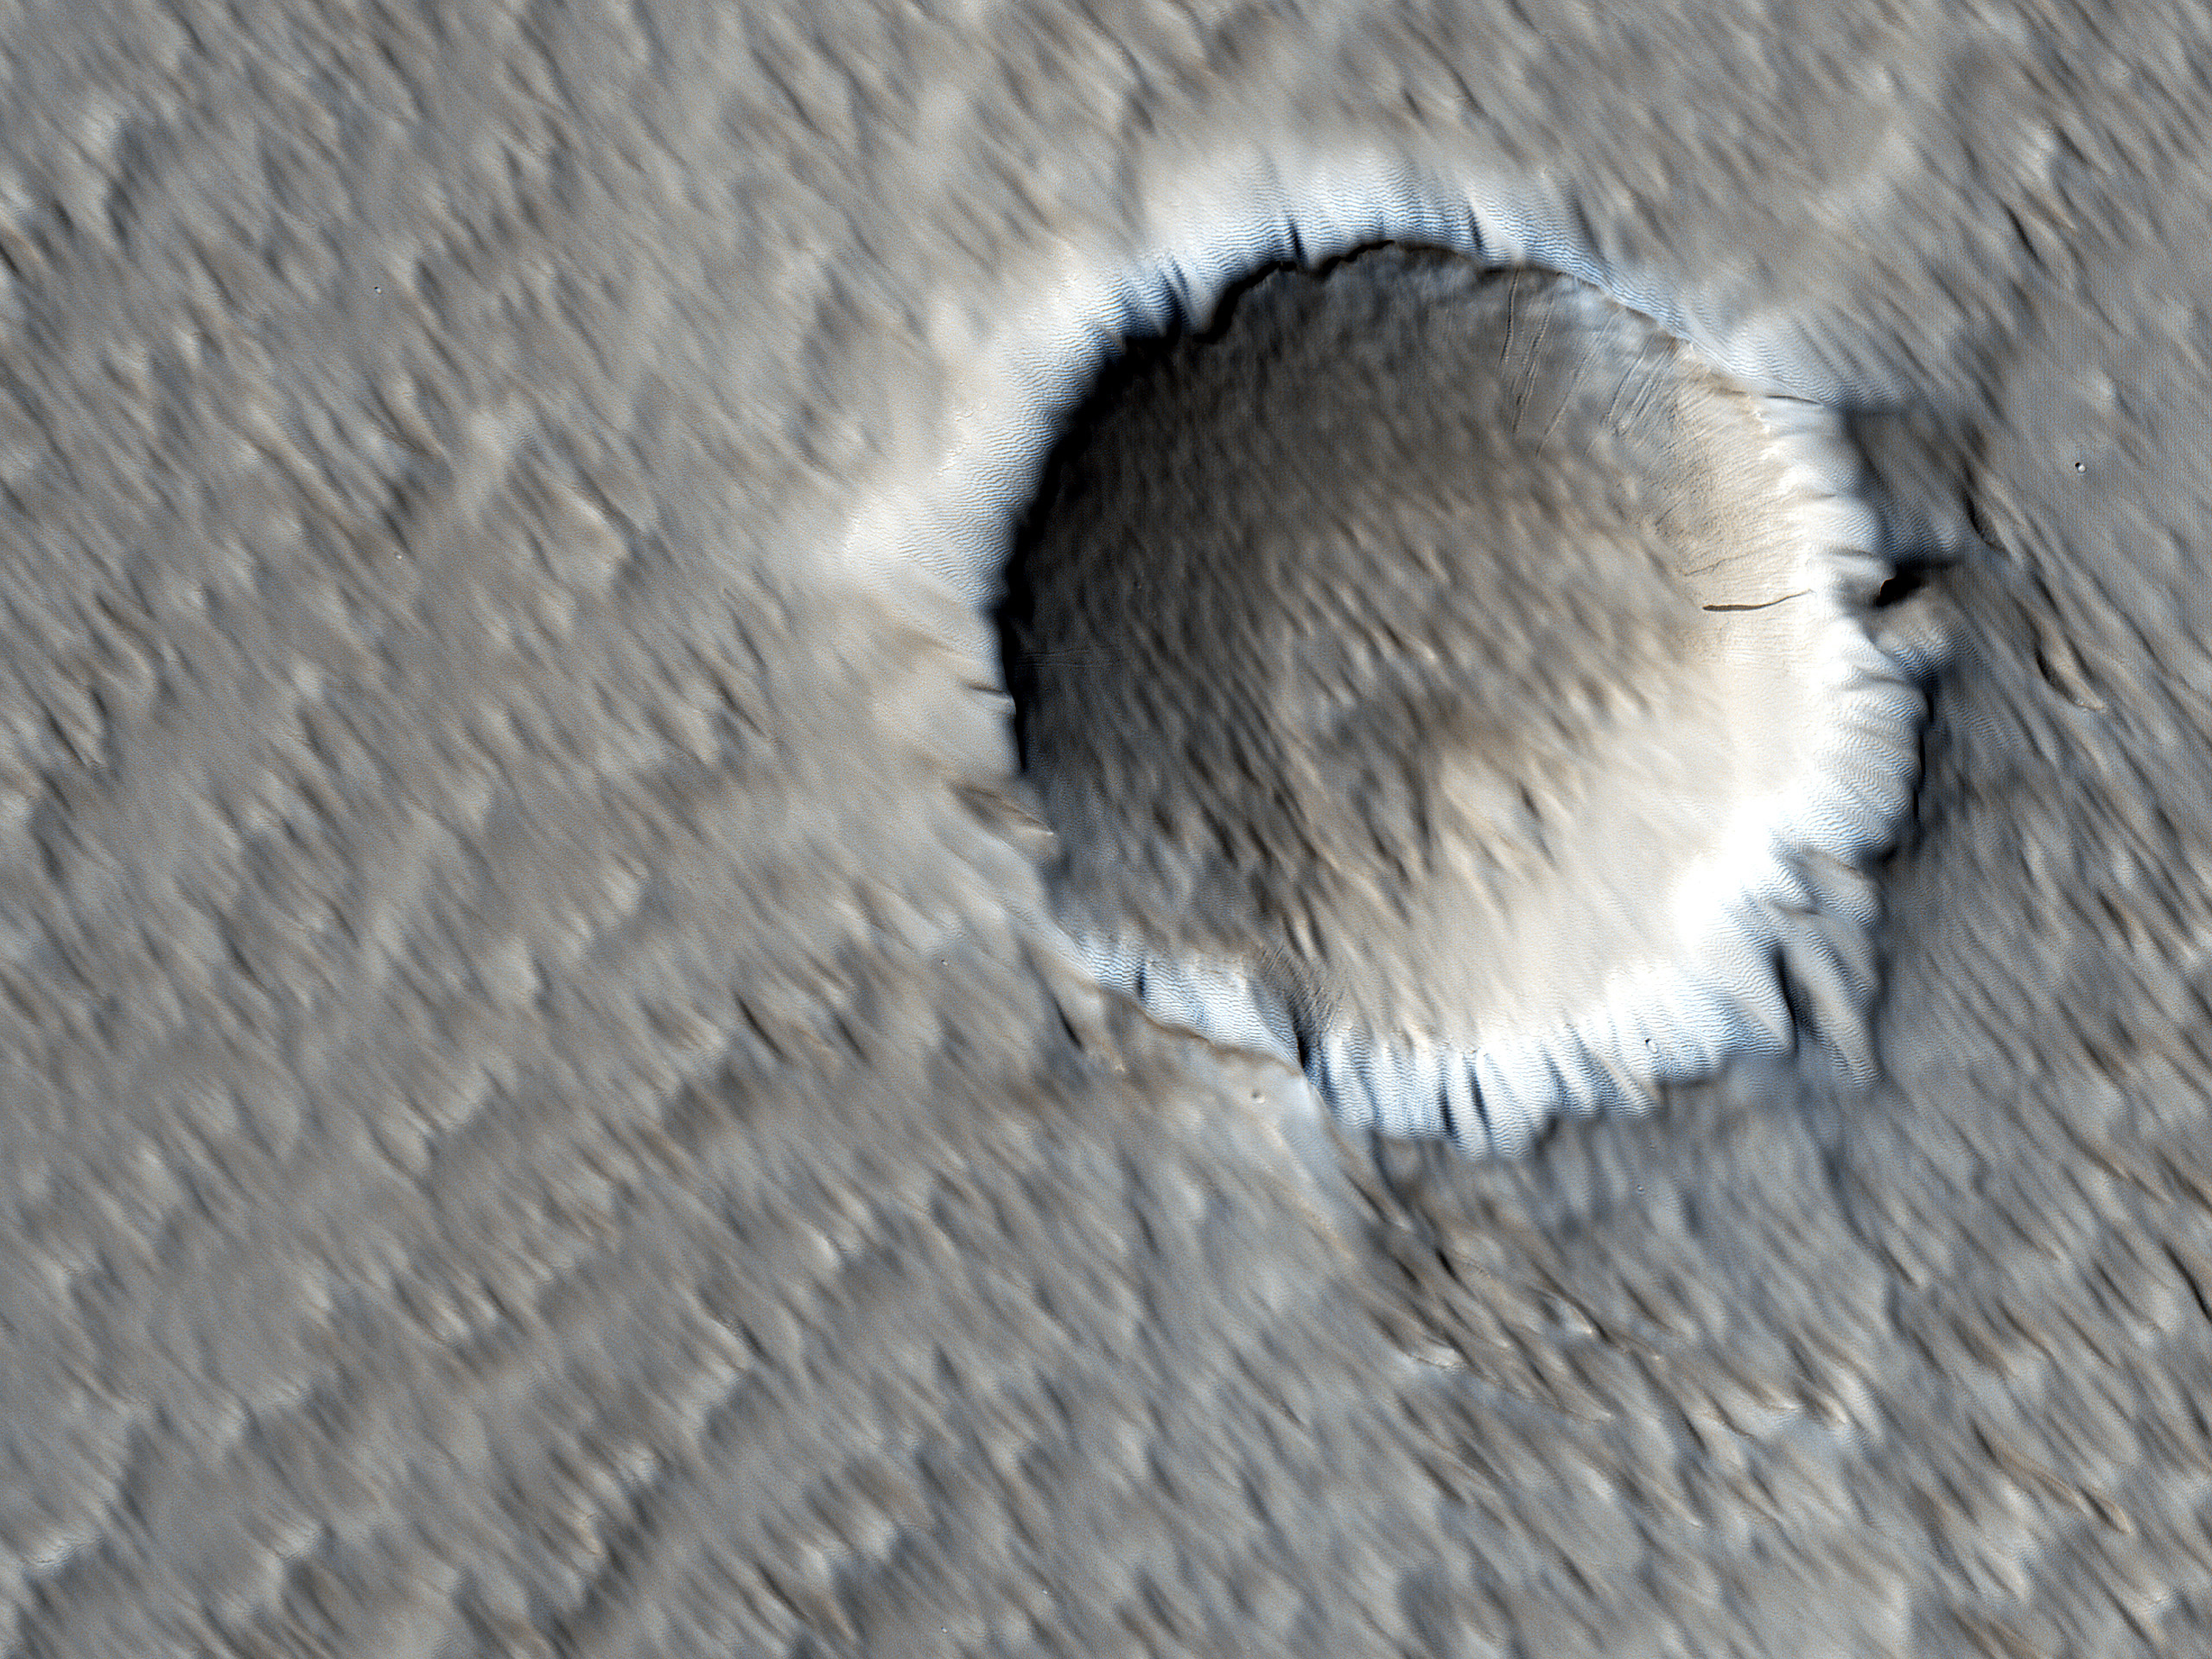 The Wind-Scoured Lava Flows of Pavonis Mons